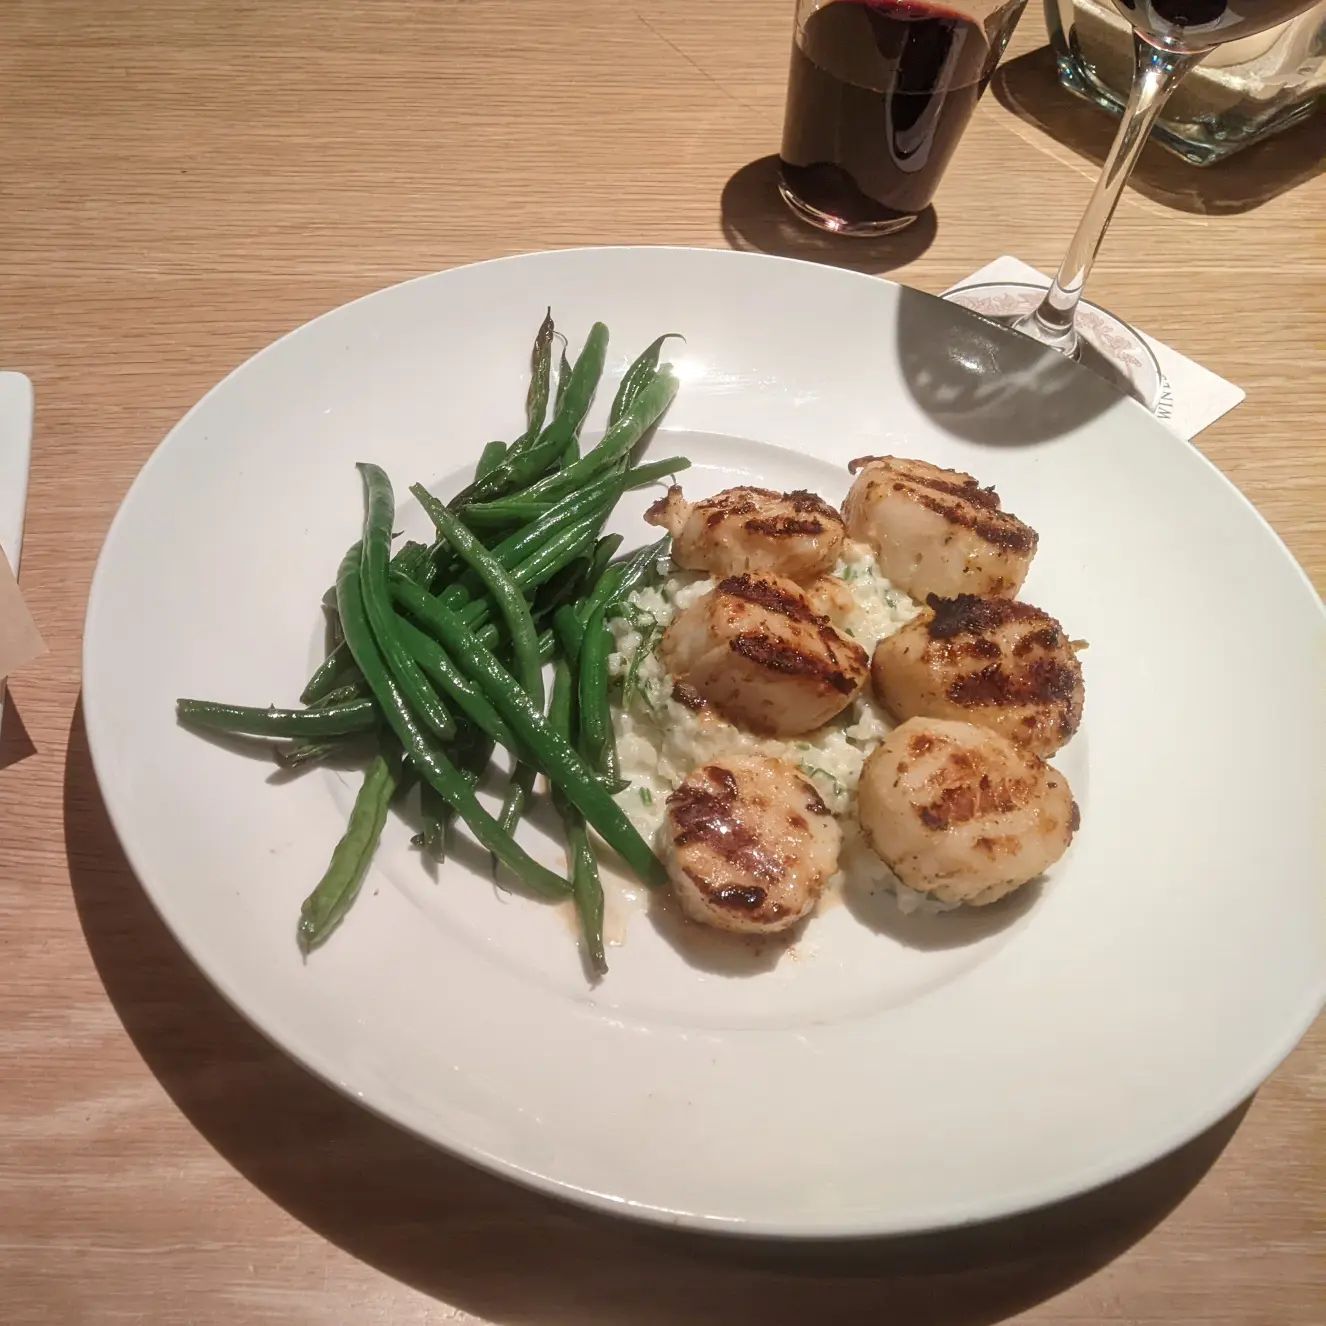 And dinner to assist with the warmup. Scallops and green beans with an extra side of Brussels. Absolutely delicious and just what I needed #foodporn